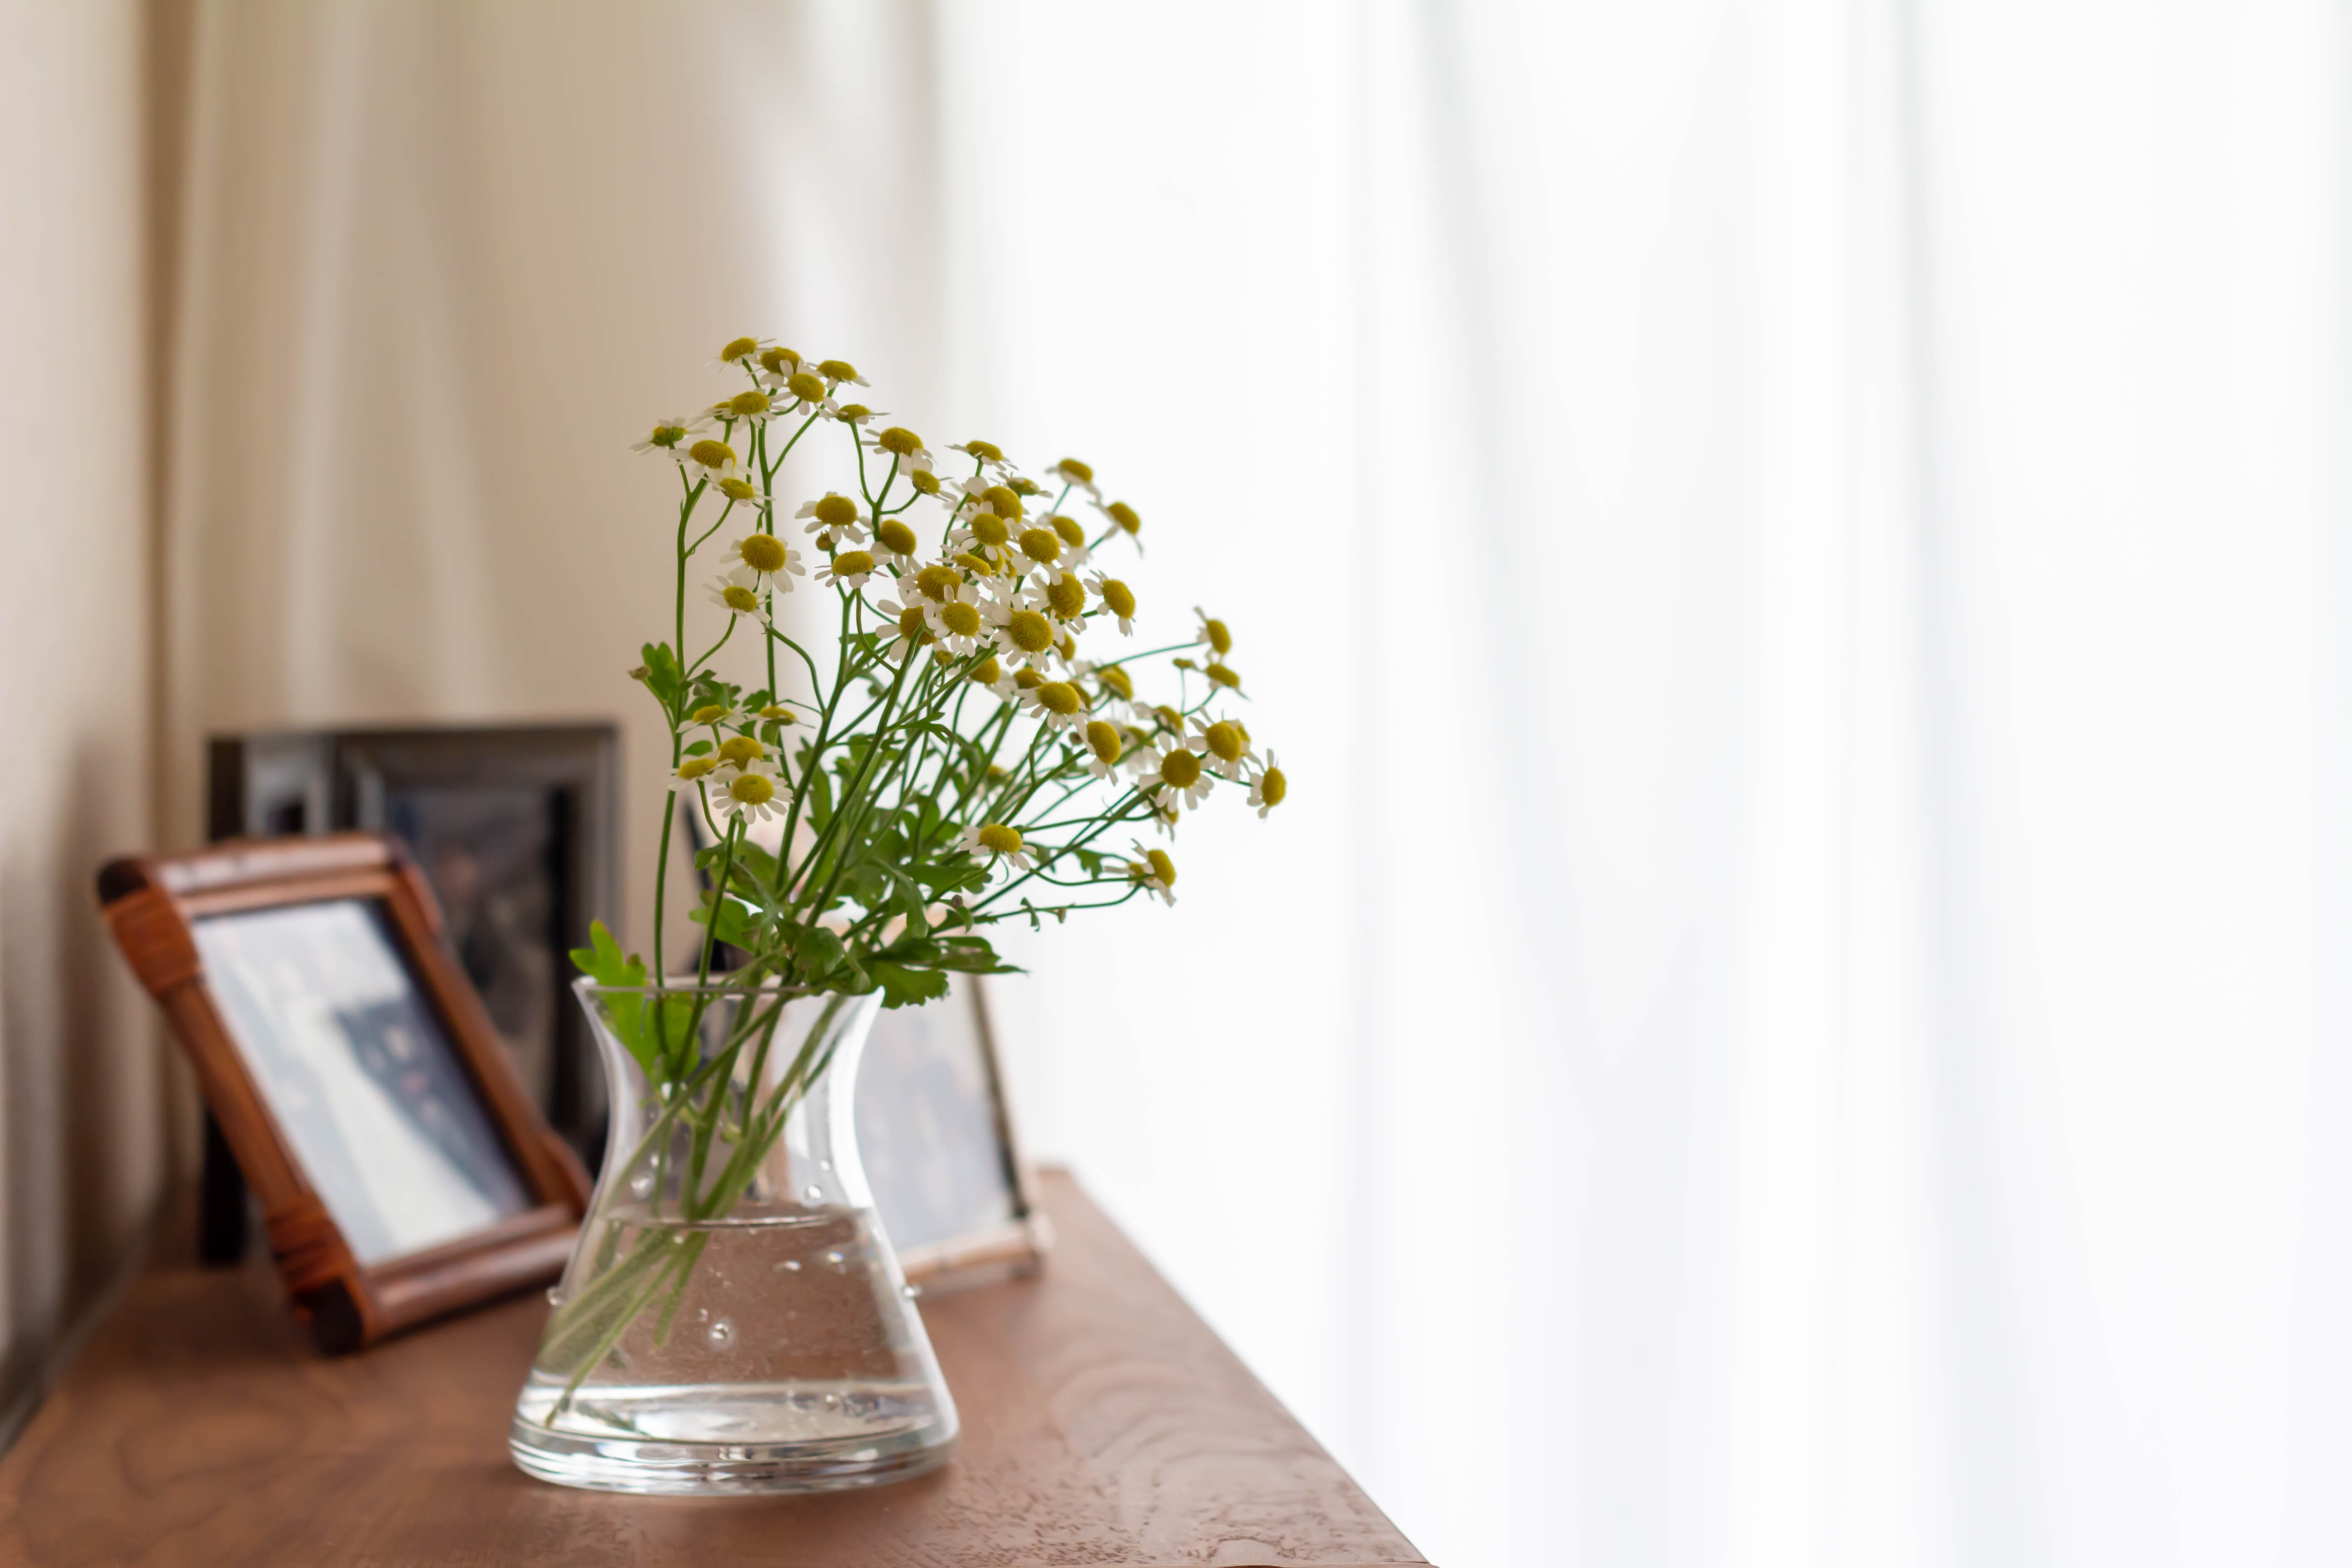 Flowers and photo frames bathing in the light that shines indoors. | Source: Shutterstock